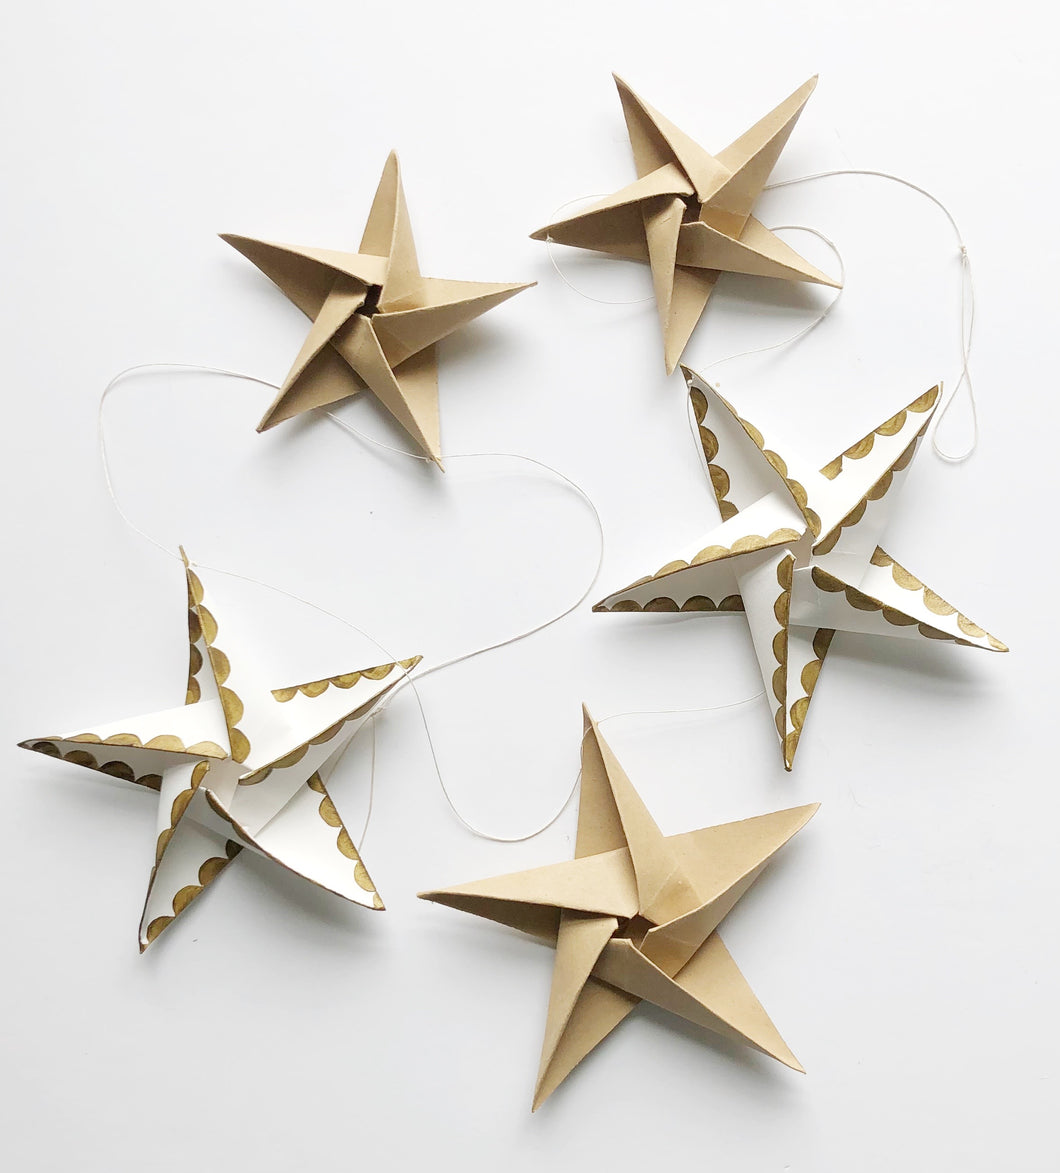 Star Garland - Ivory and brown paper with antique gold hand painted scallop edge